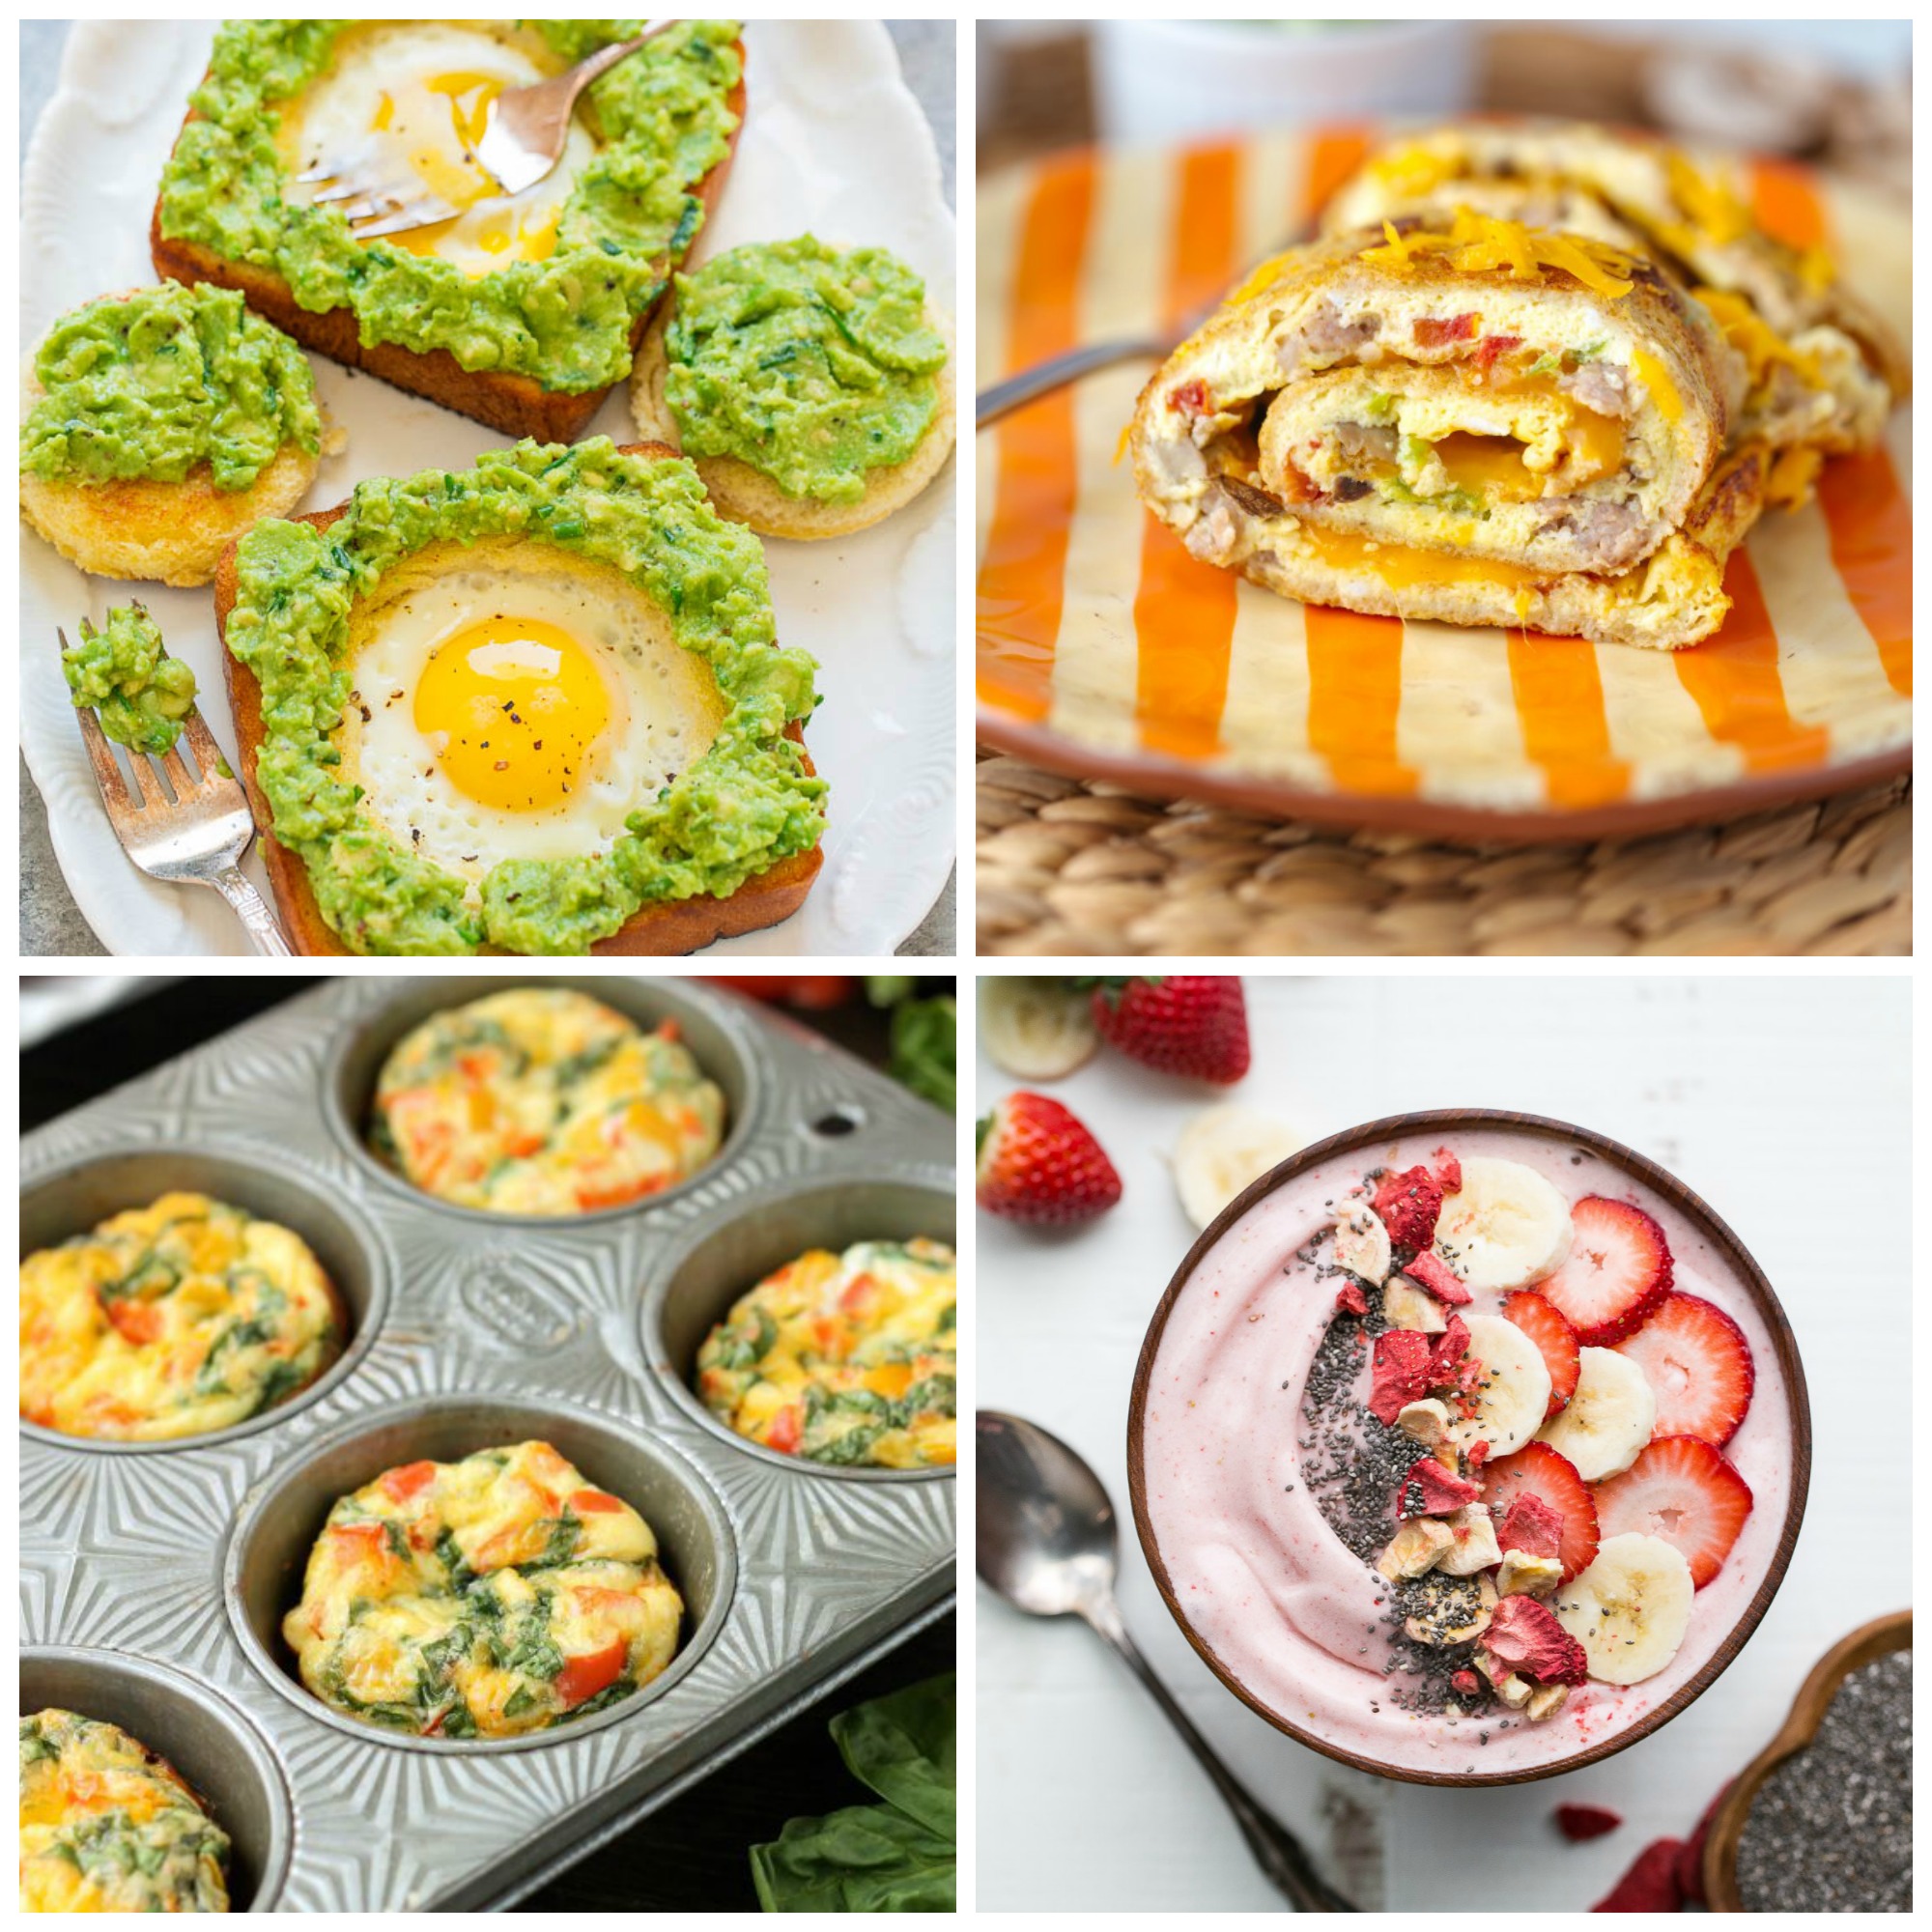 12 Super Quick Healthy Breakfast Ideas in a Hurry | Healthy Ideas for Kids